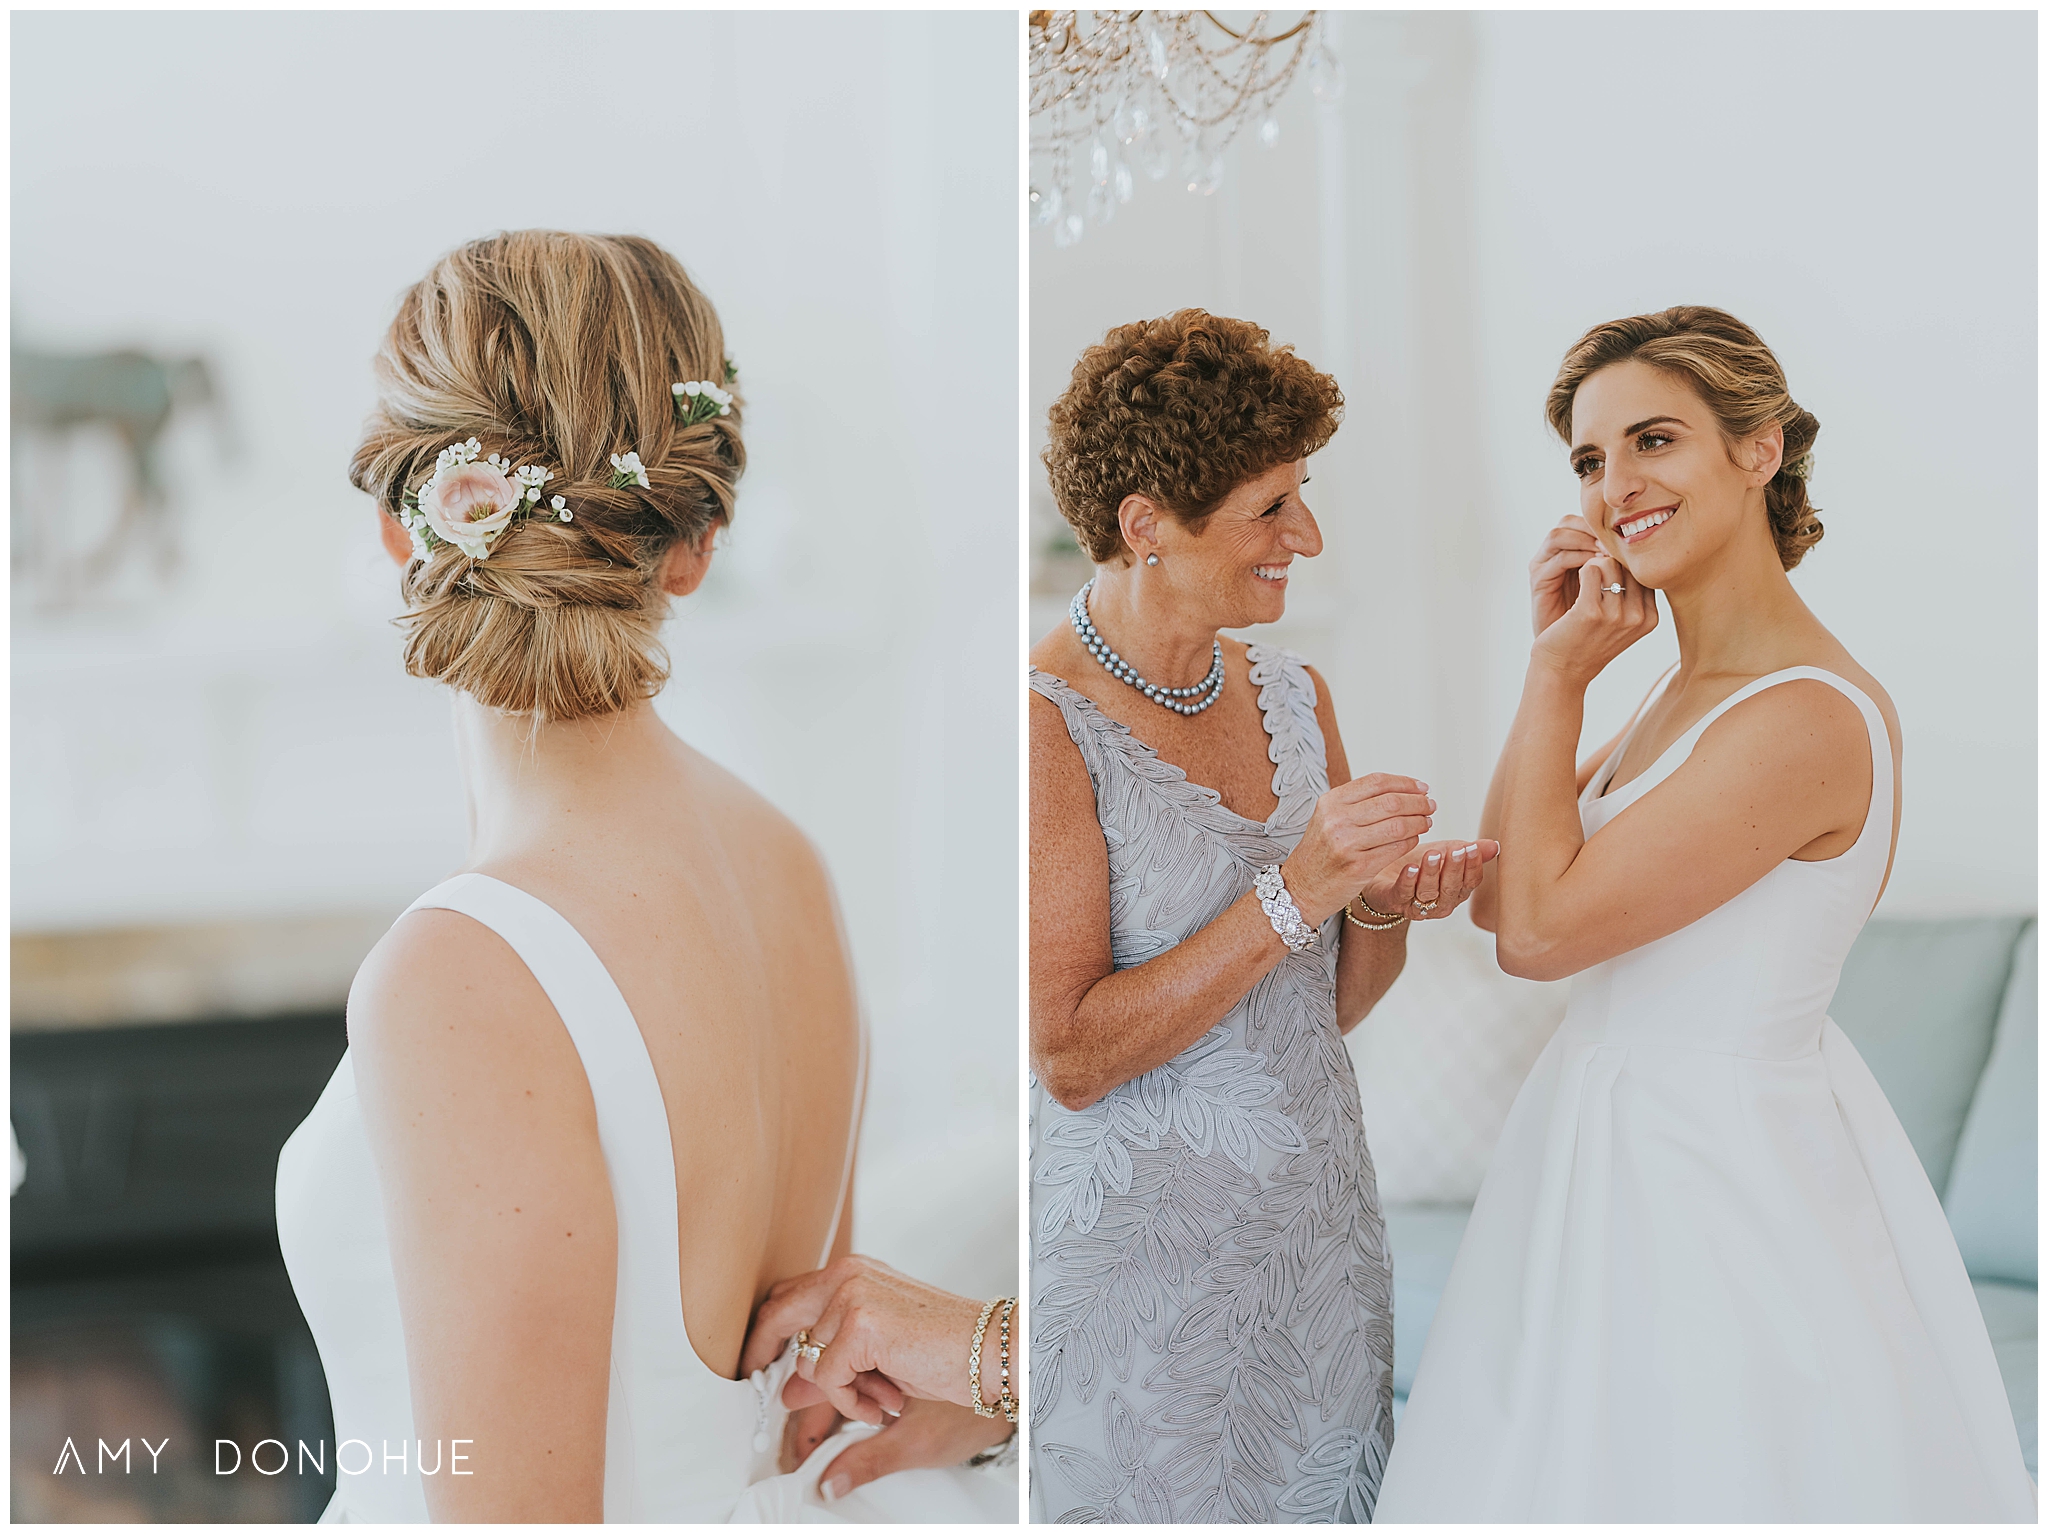 Bride getting into the dress | Blue Horse Inn | Vermont Wedding Photographer | © Amy Donohue Photography